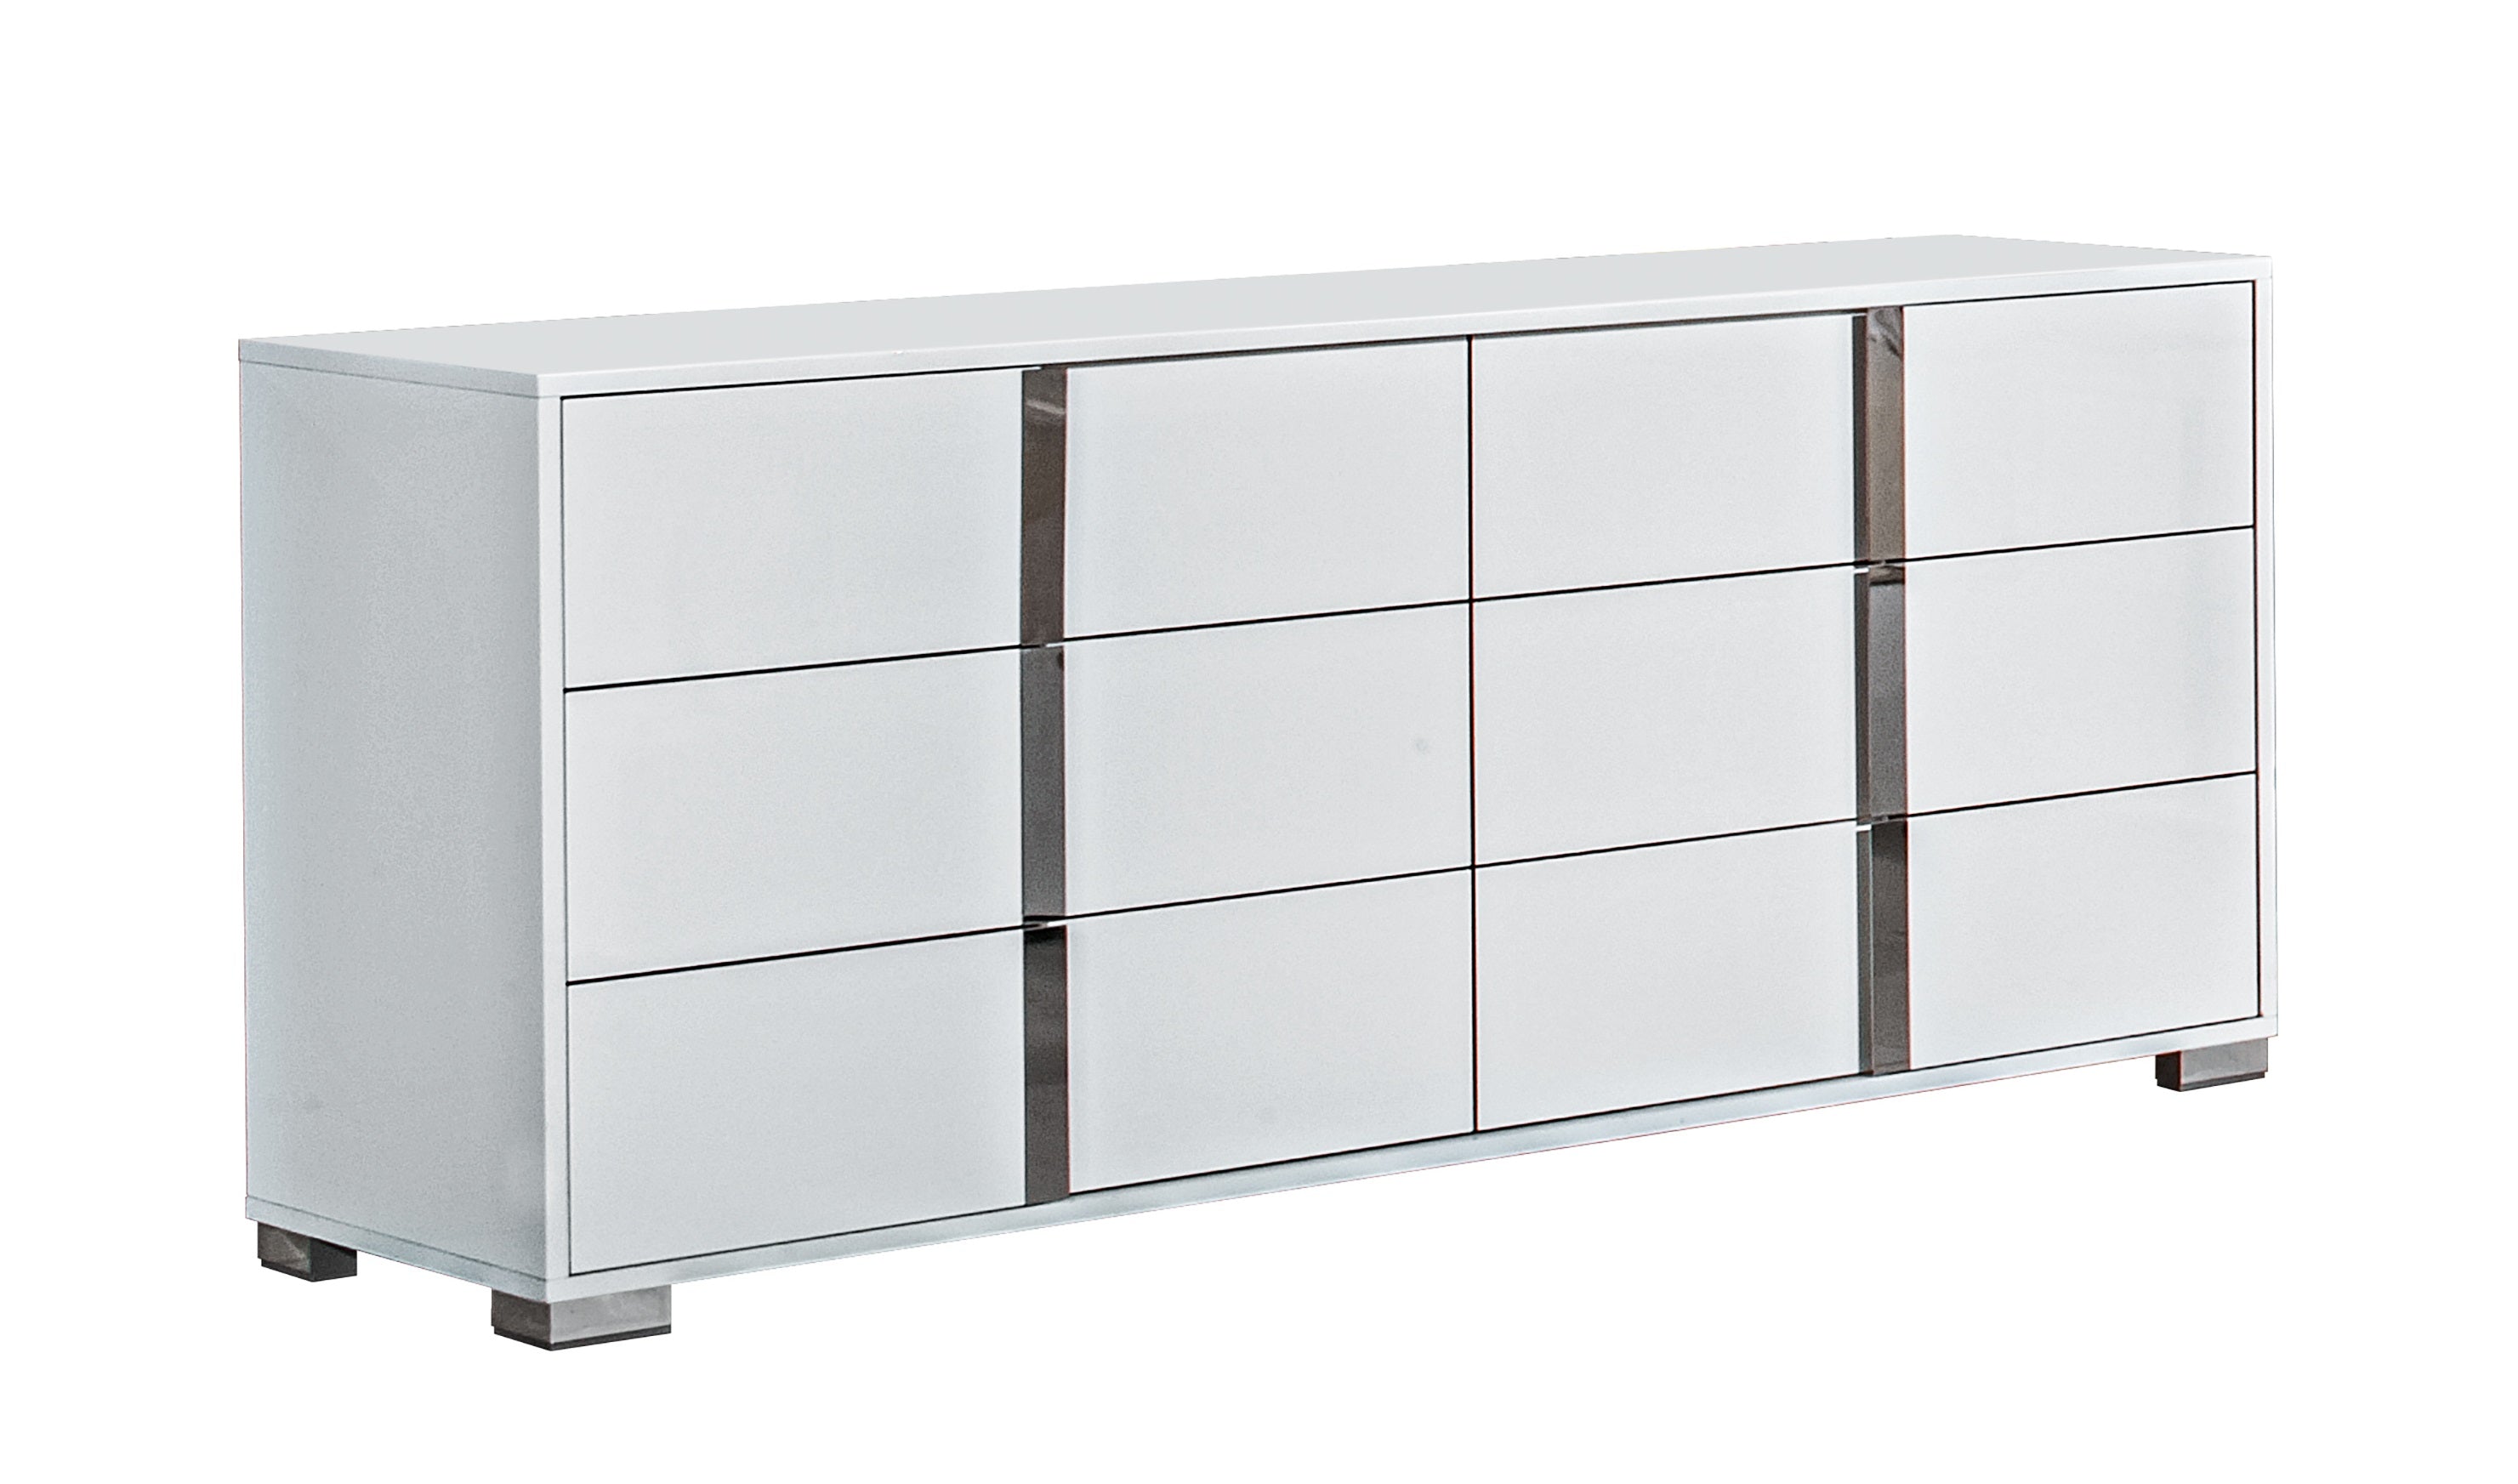 Alice Modern Storage Bed in Gloss White